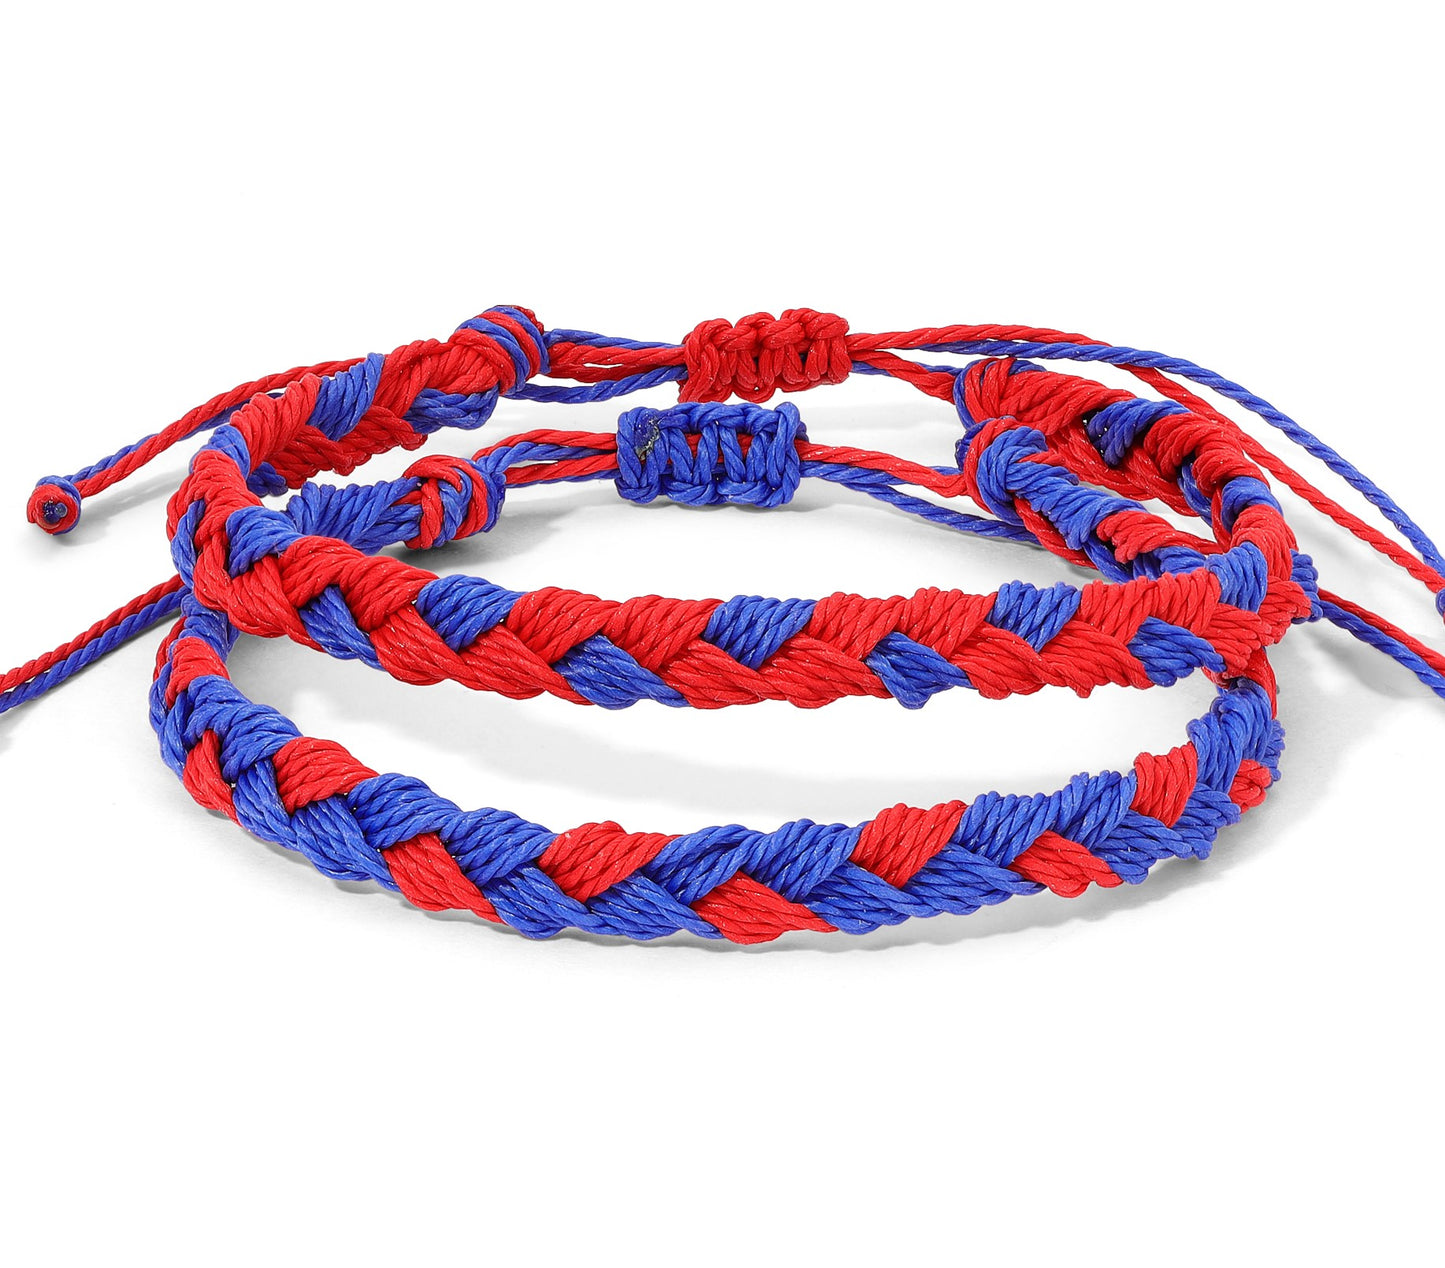 Red and Blue Team Color Braided Bracelet - Set of Two